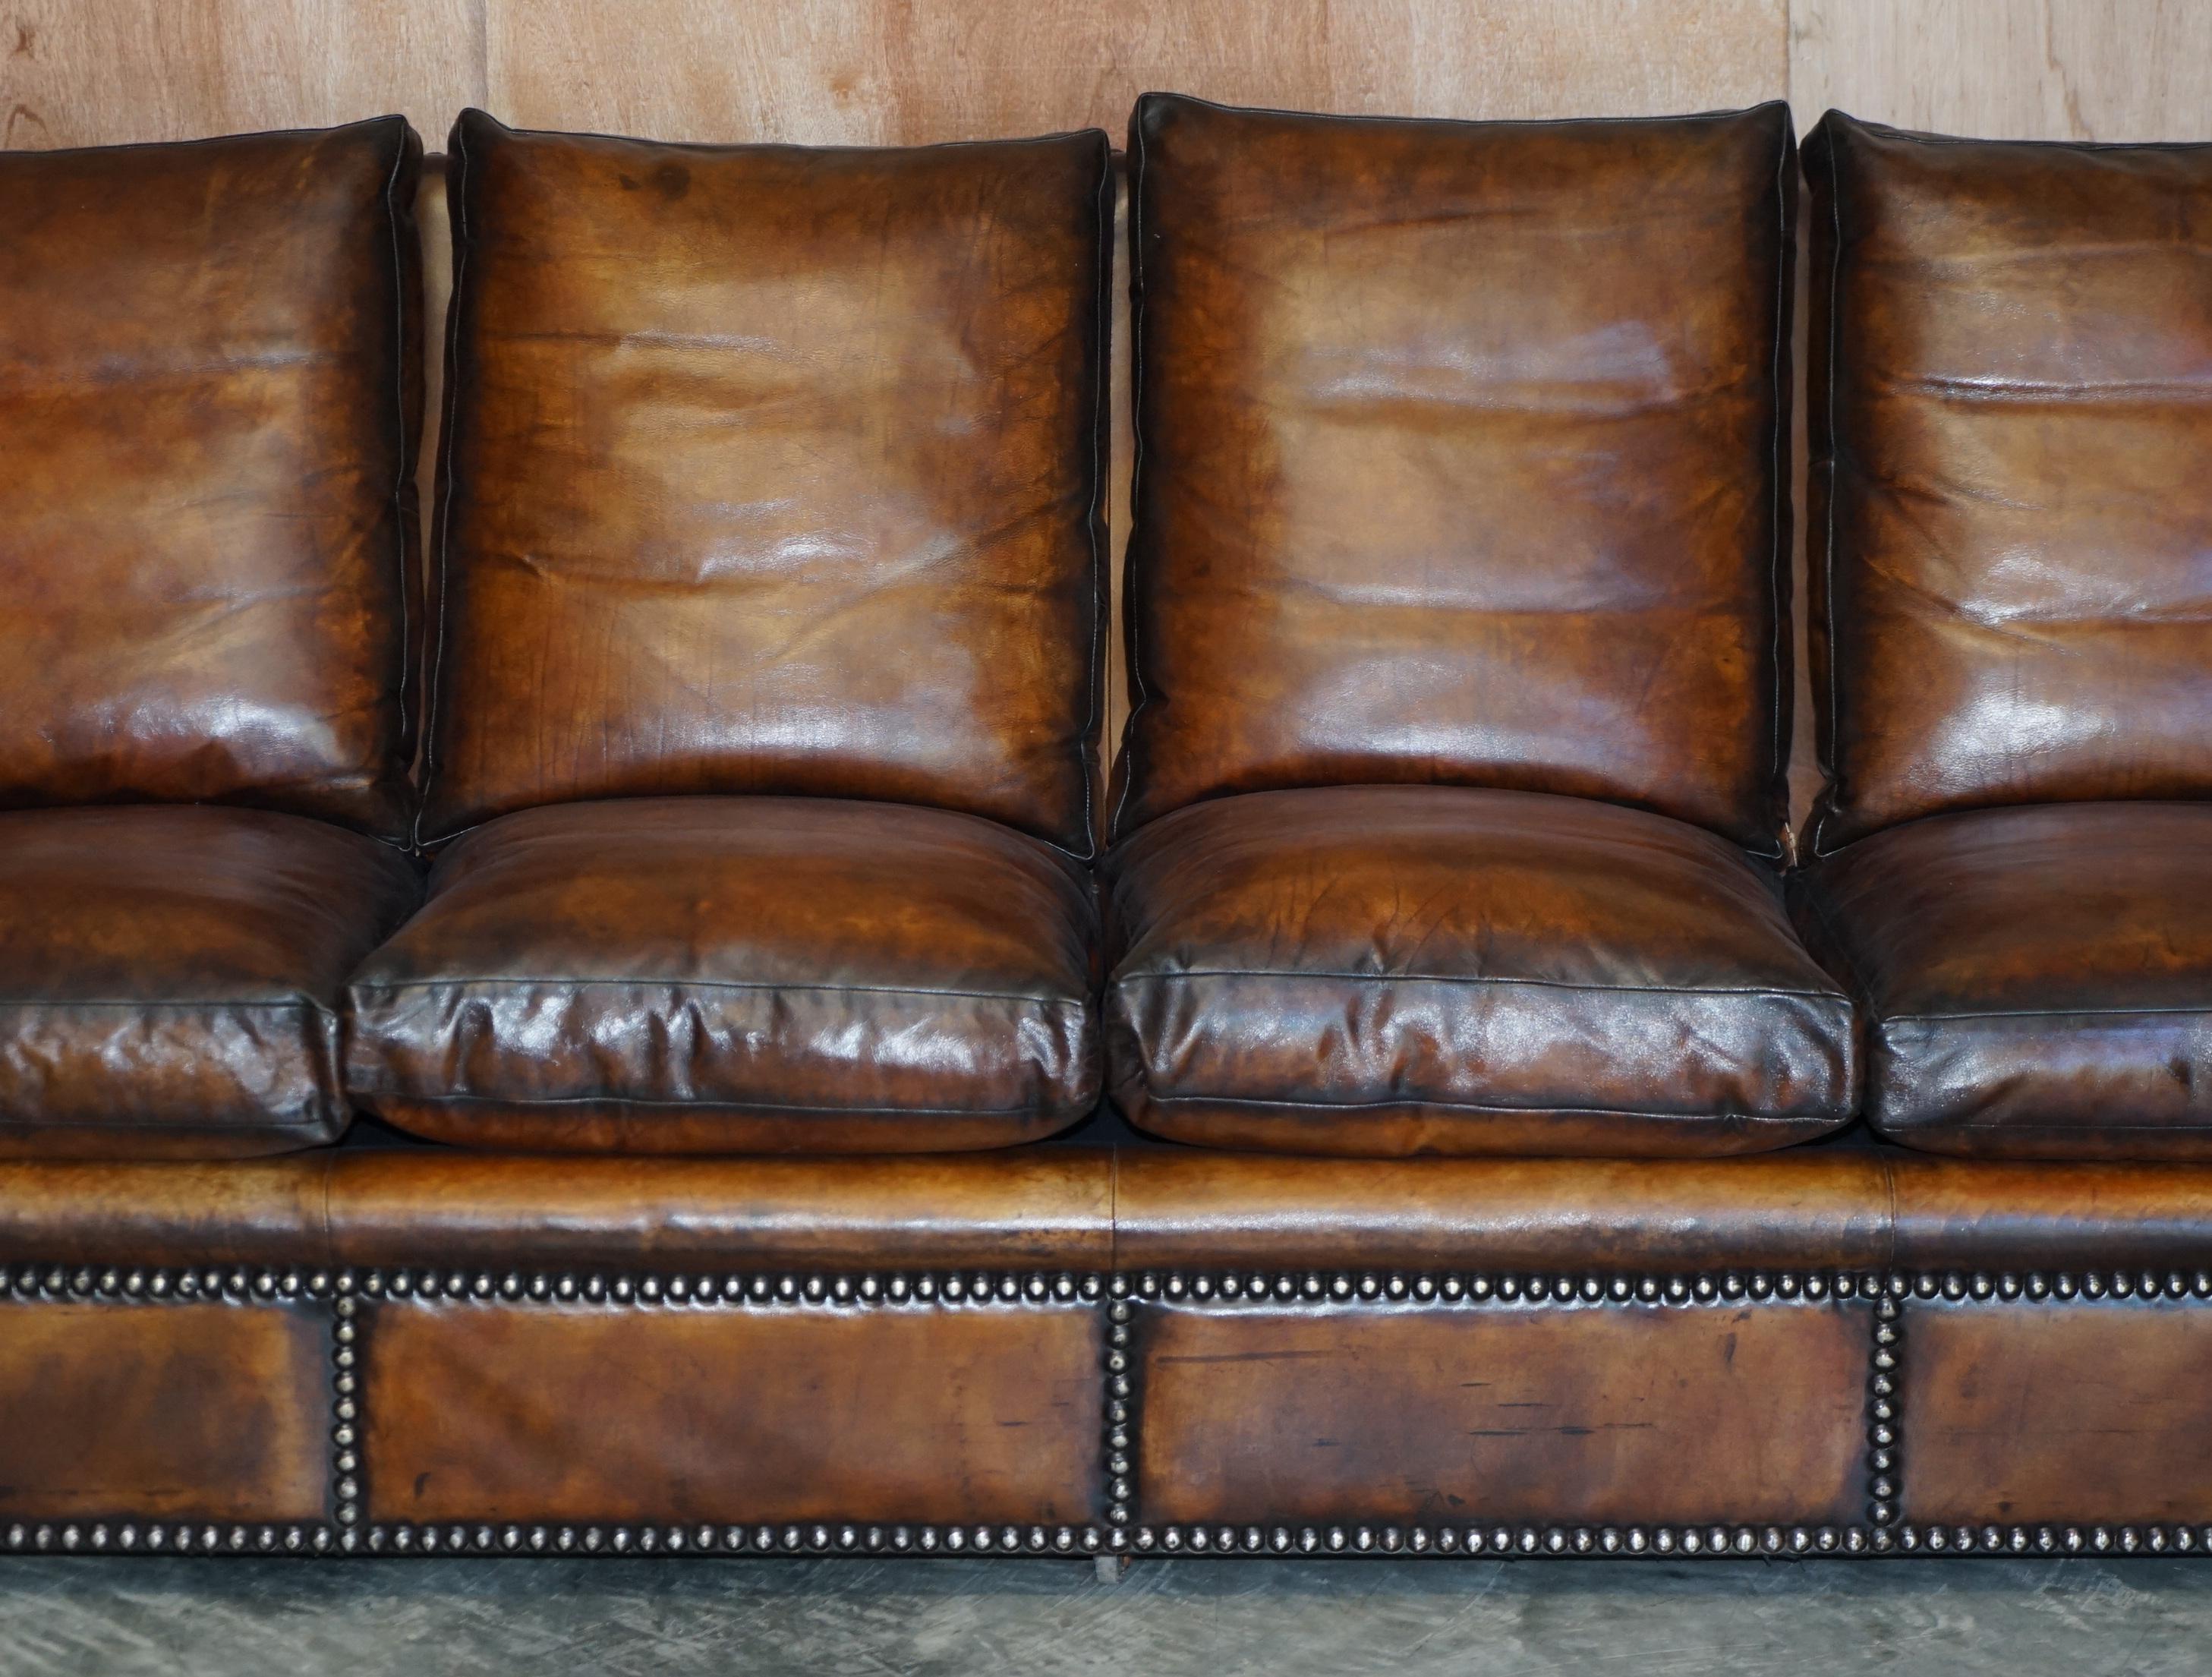 old leather couch